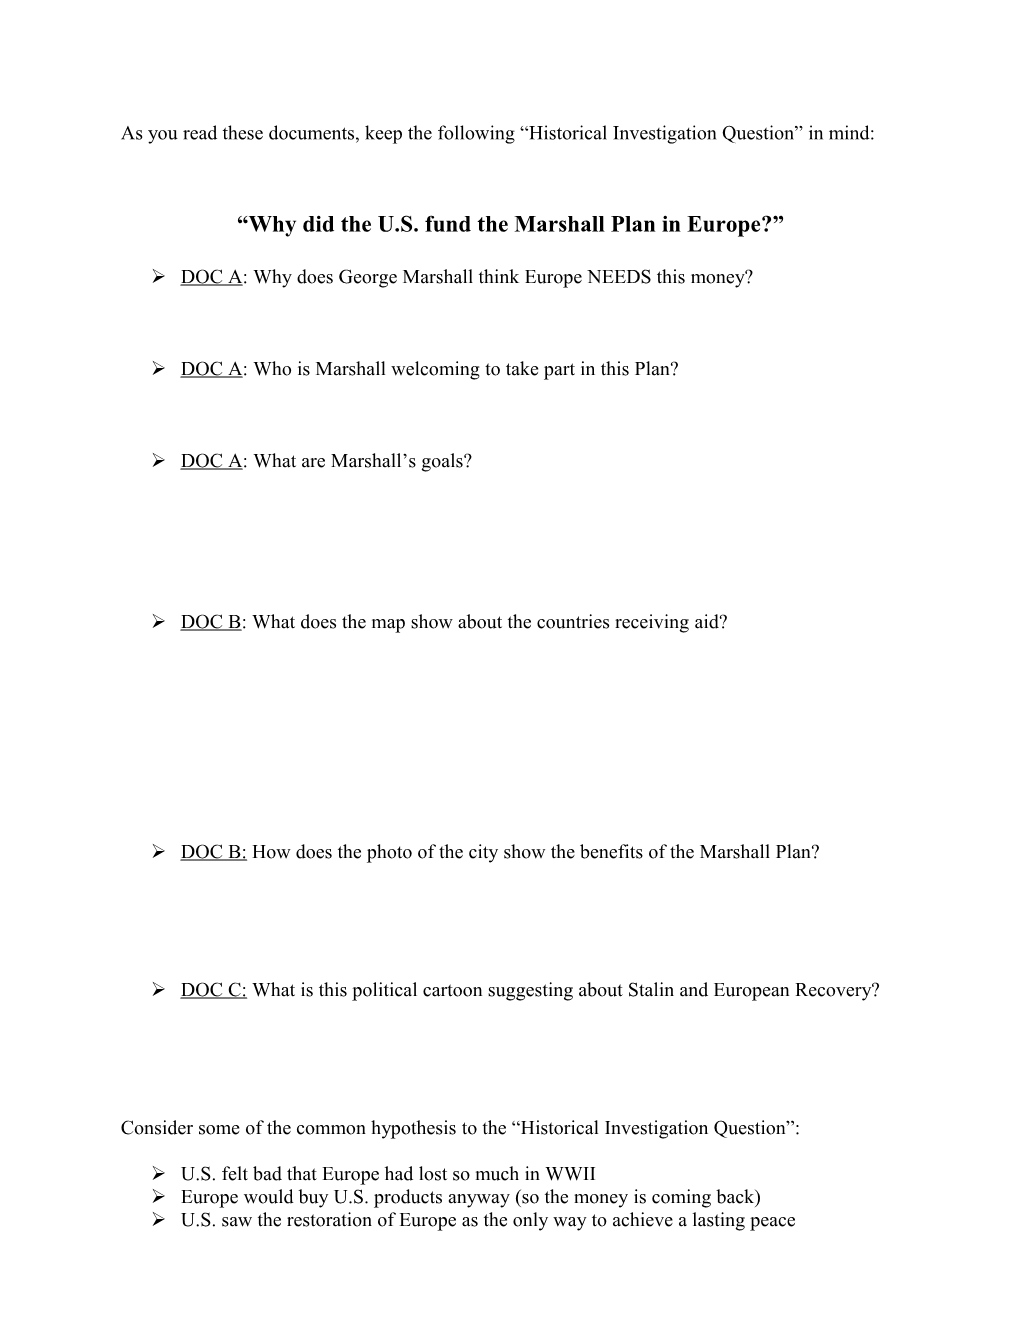 As You Read These Documents, Keep the Following Historical Investigation Question in Mind